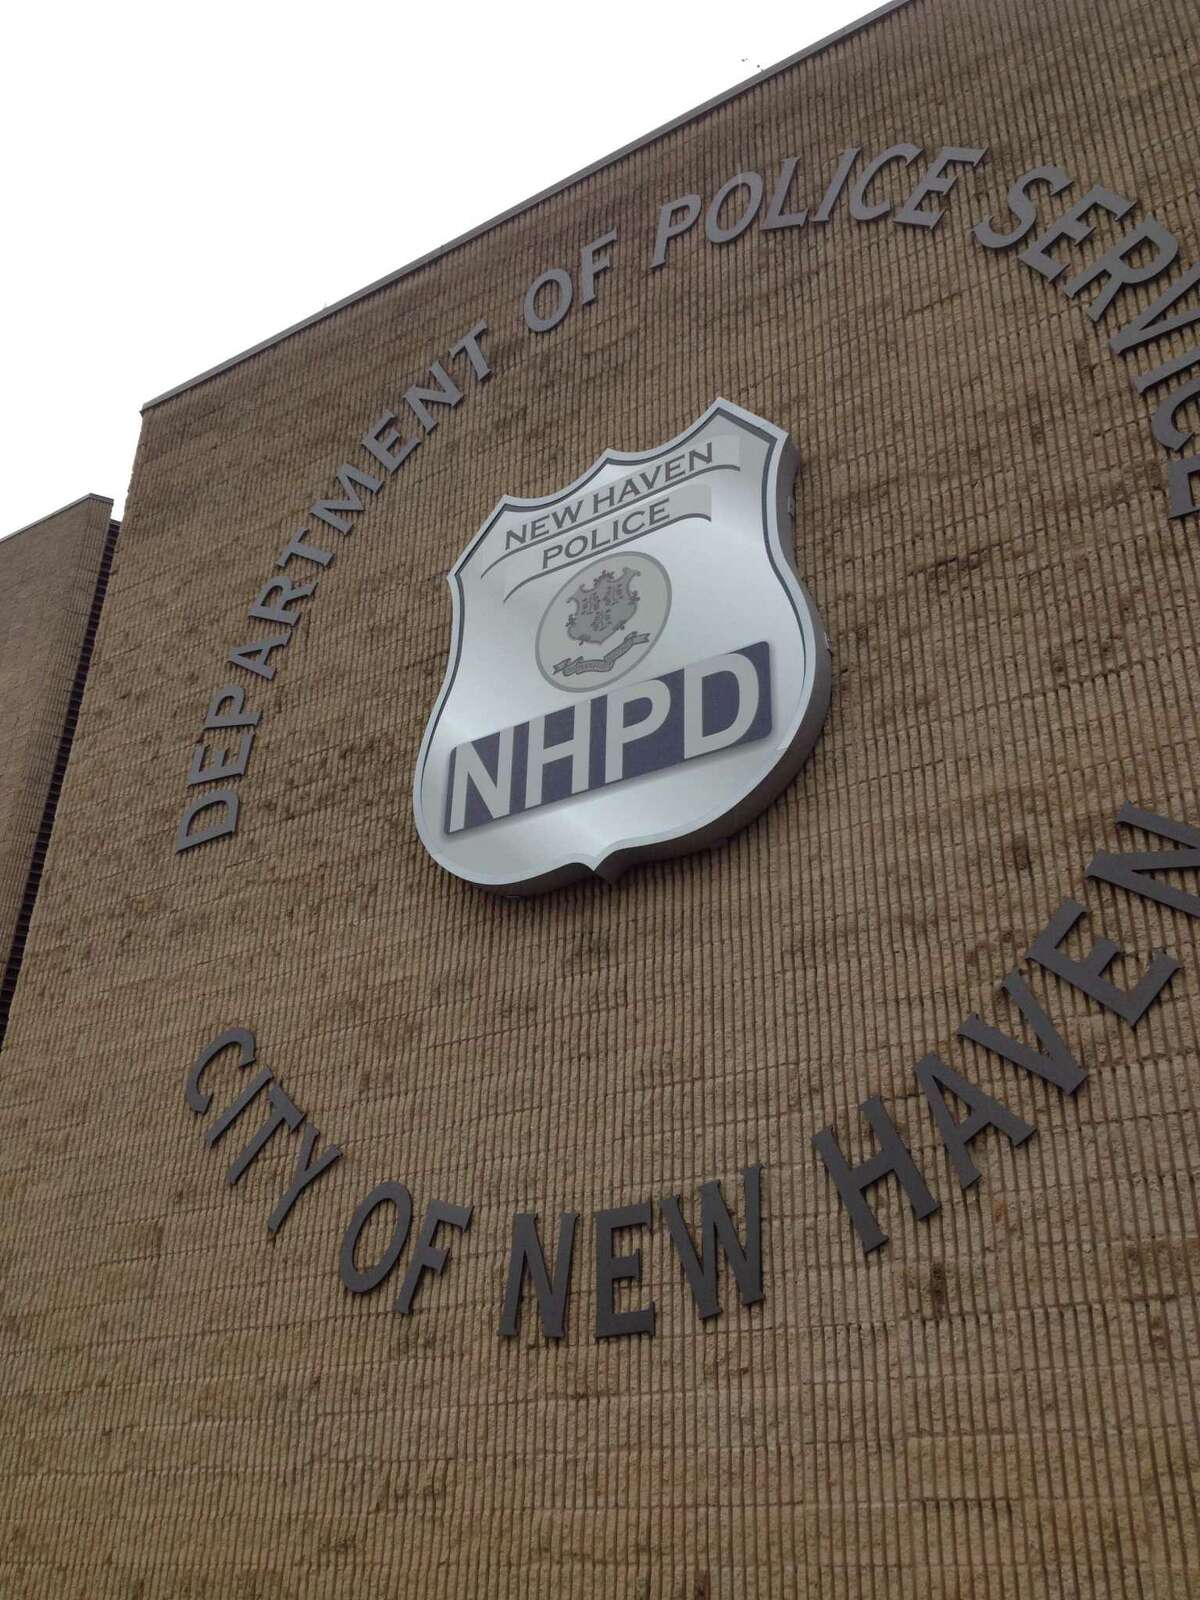 New Haven Police Department, 1 Union Ave., New haven